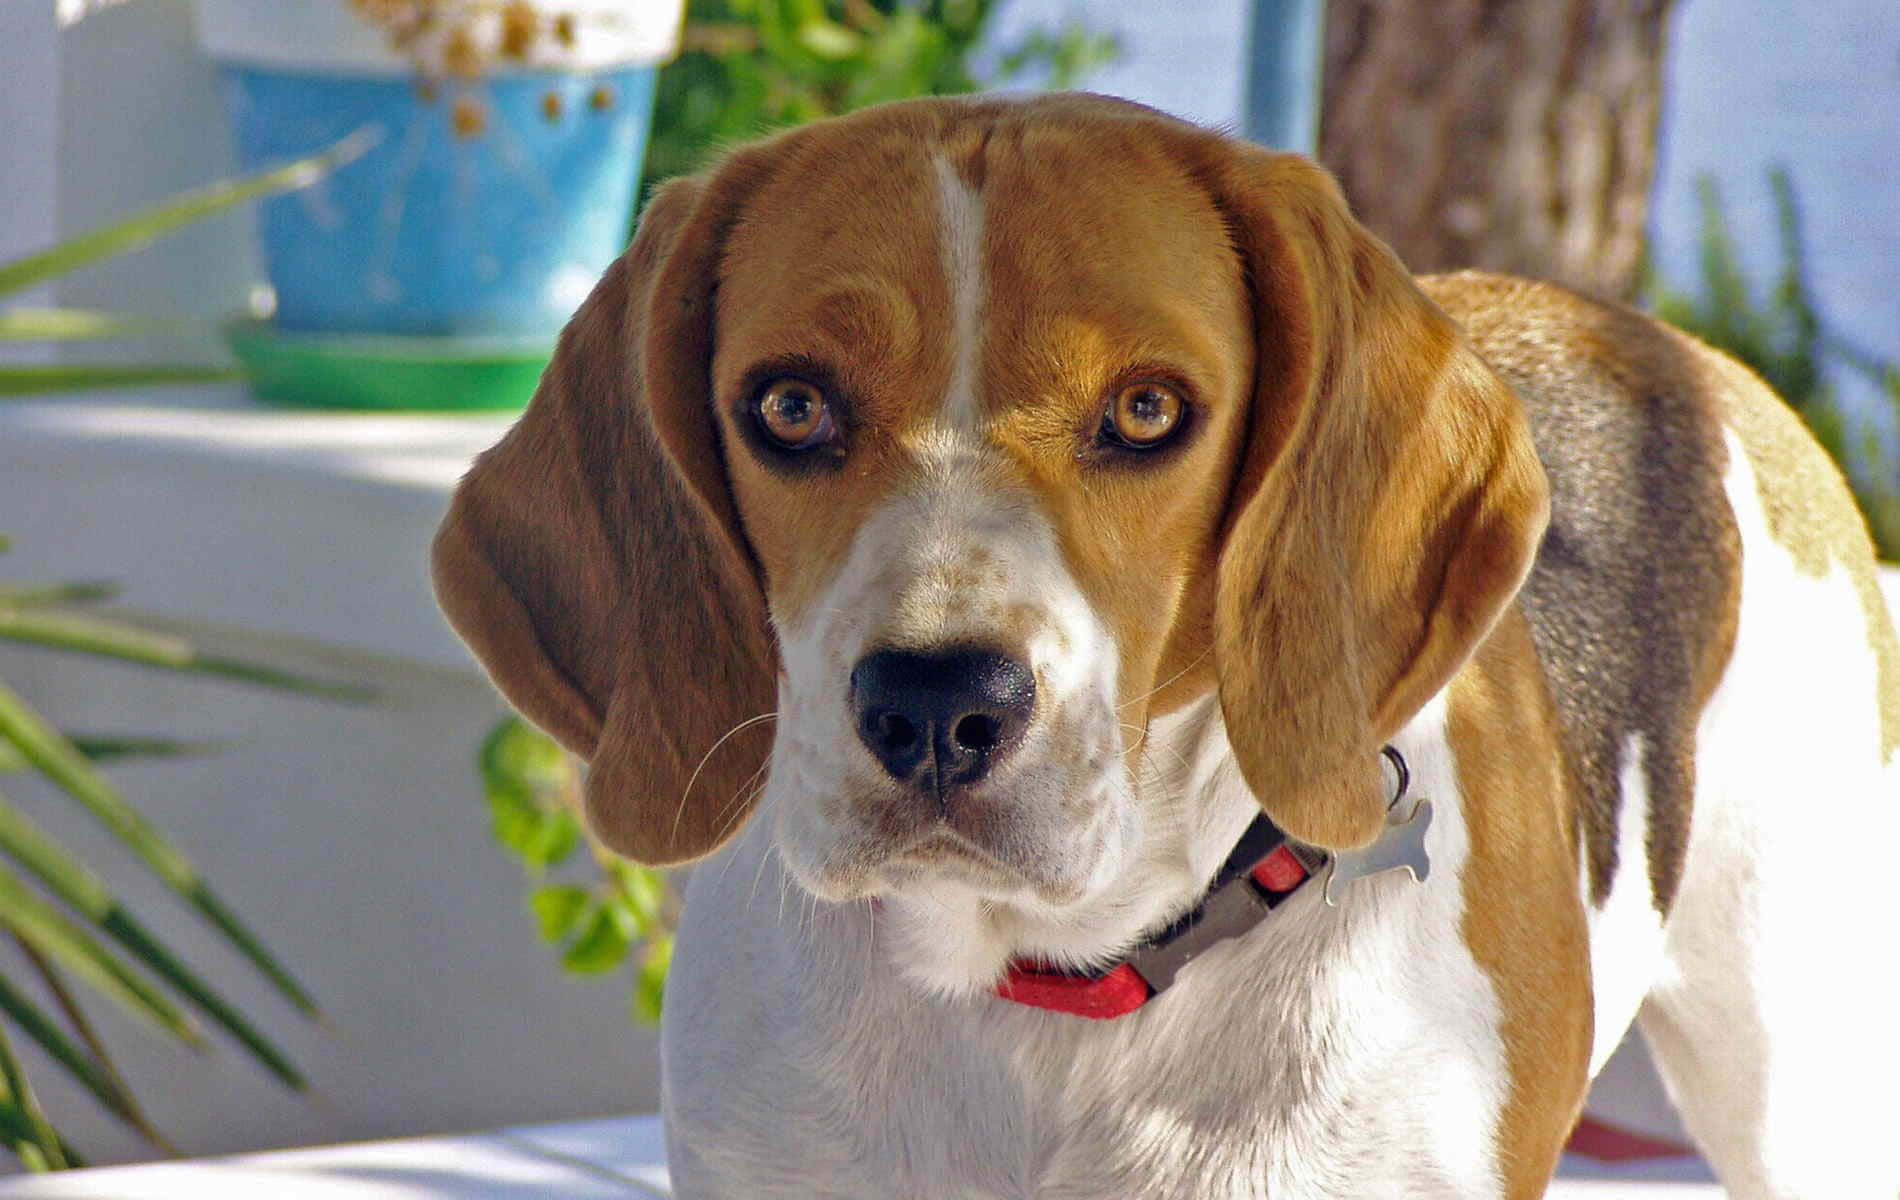 a beagle dog is standing on a white tile floor